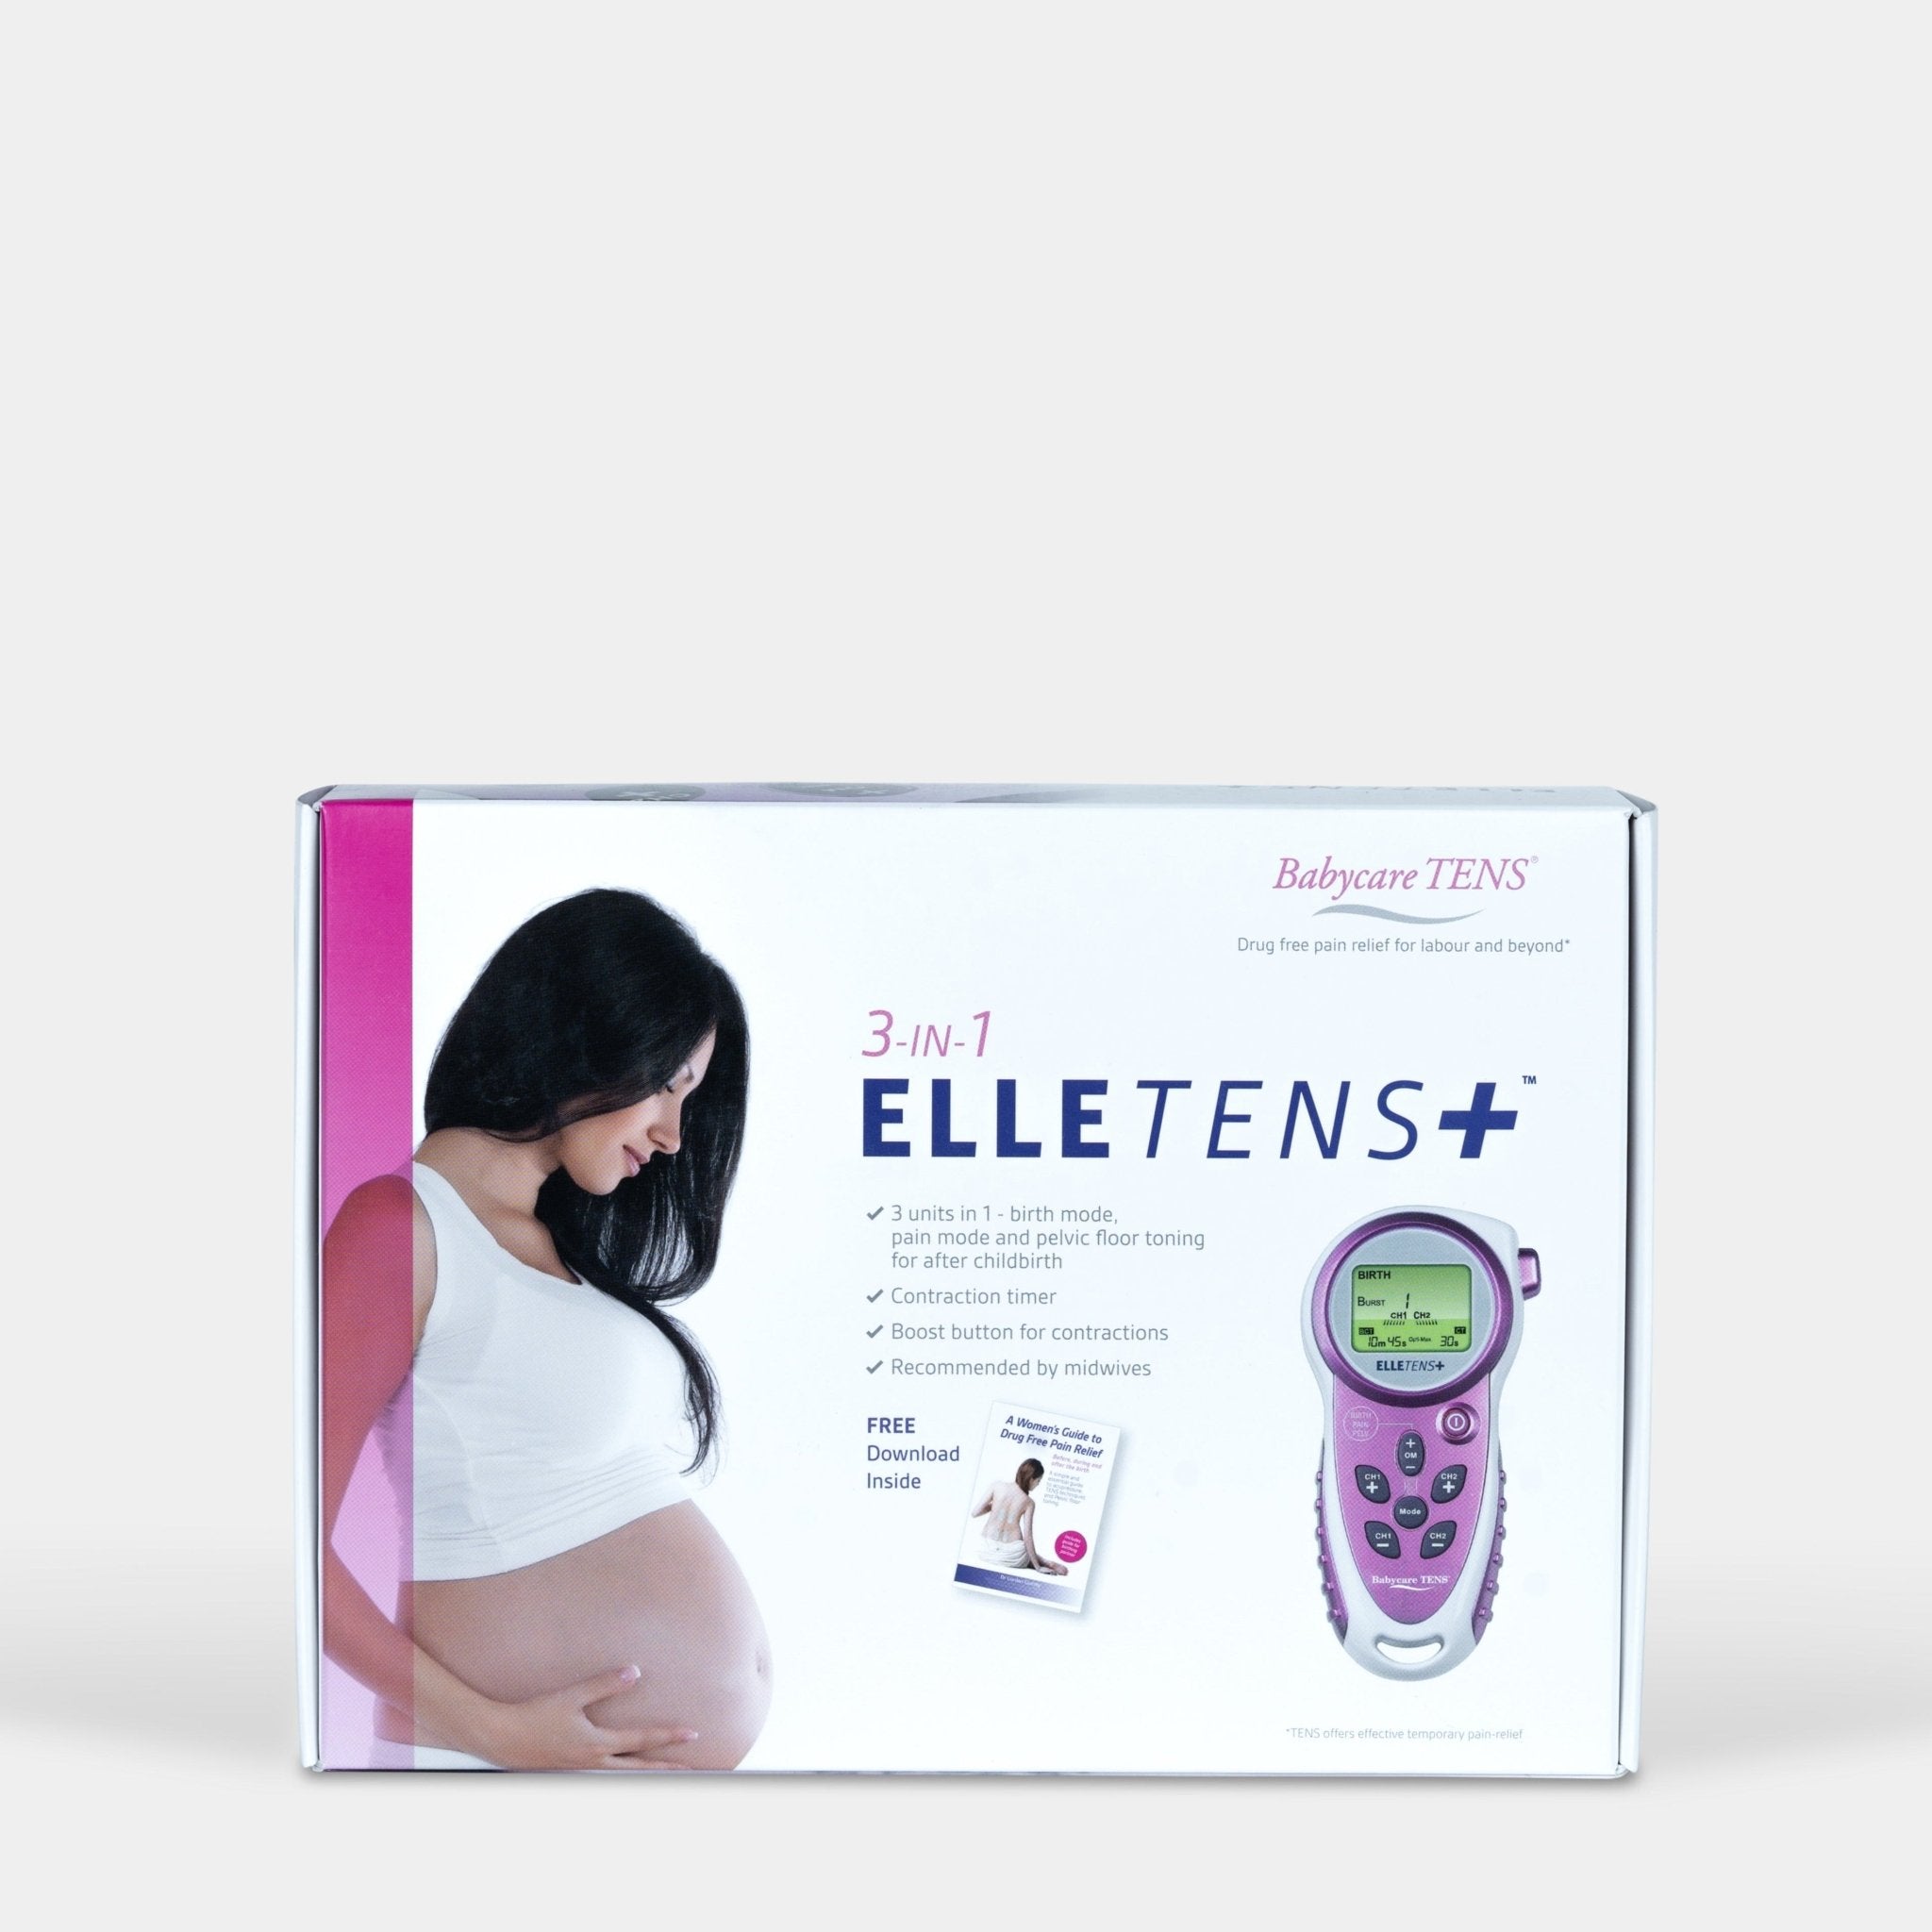 Elle TENS Plus - The Birth Store-Babycare TENS